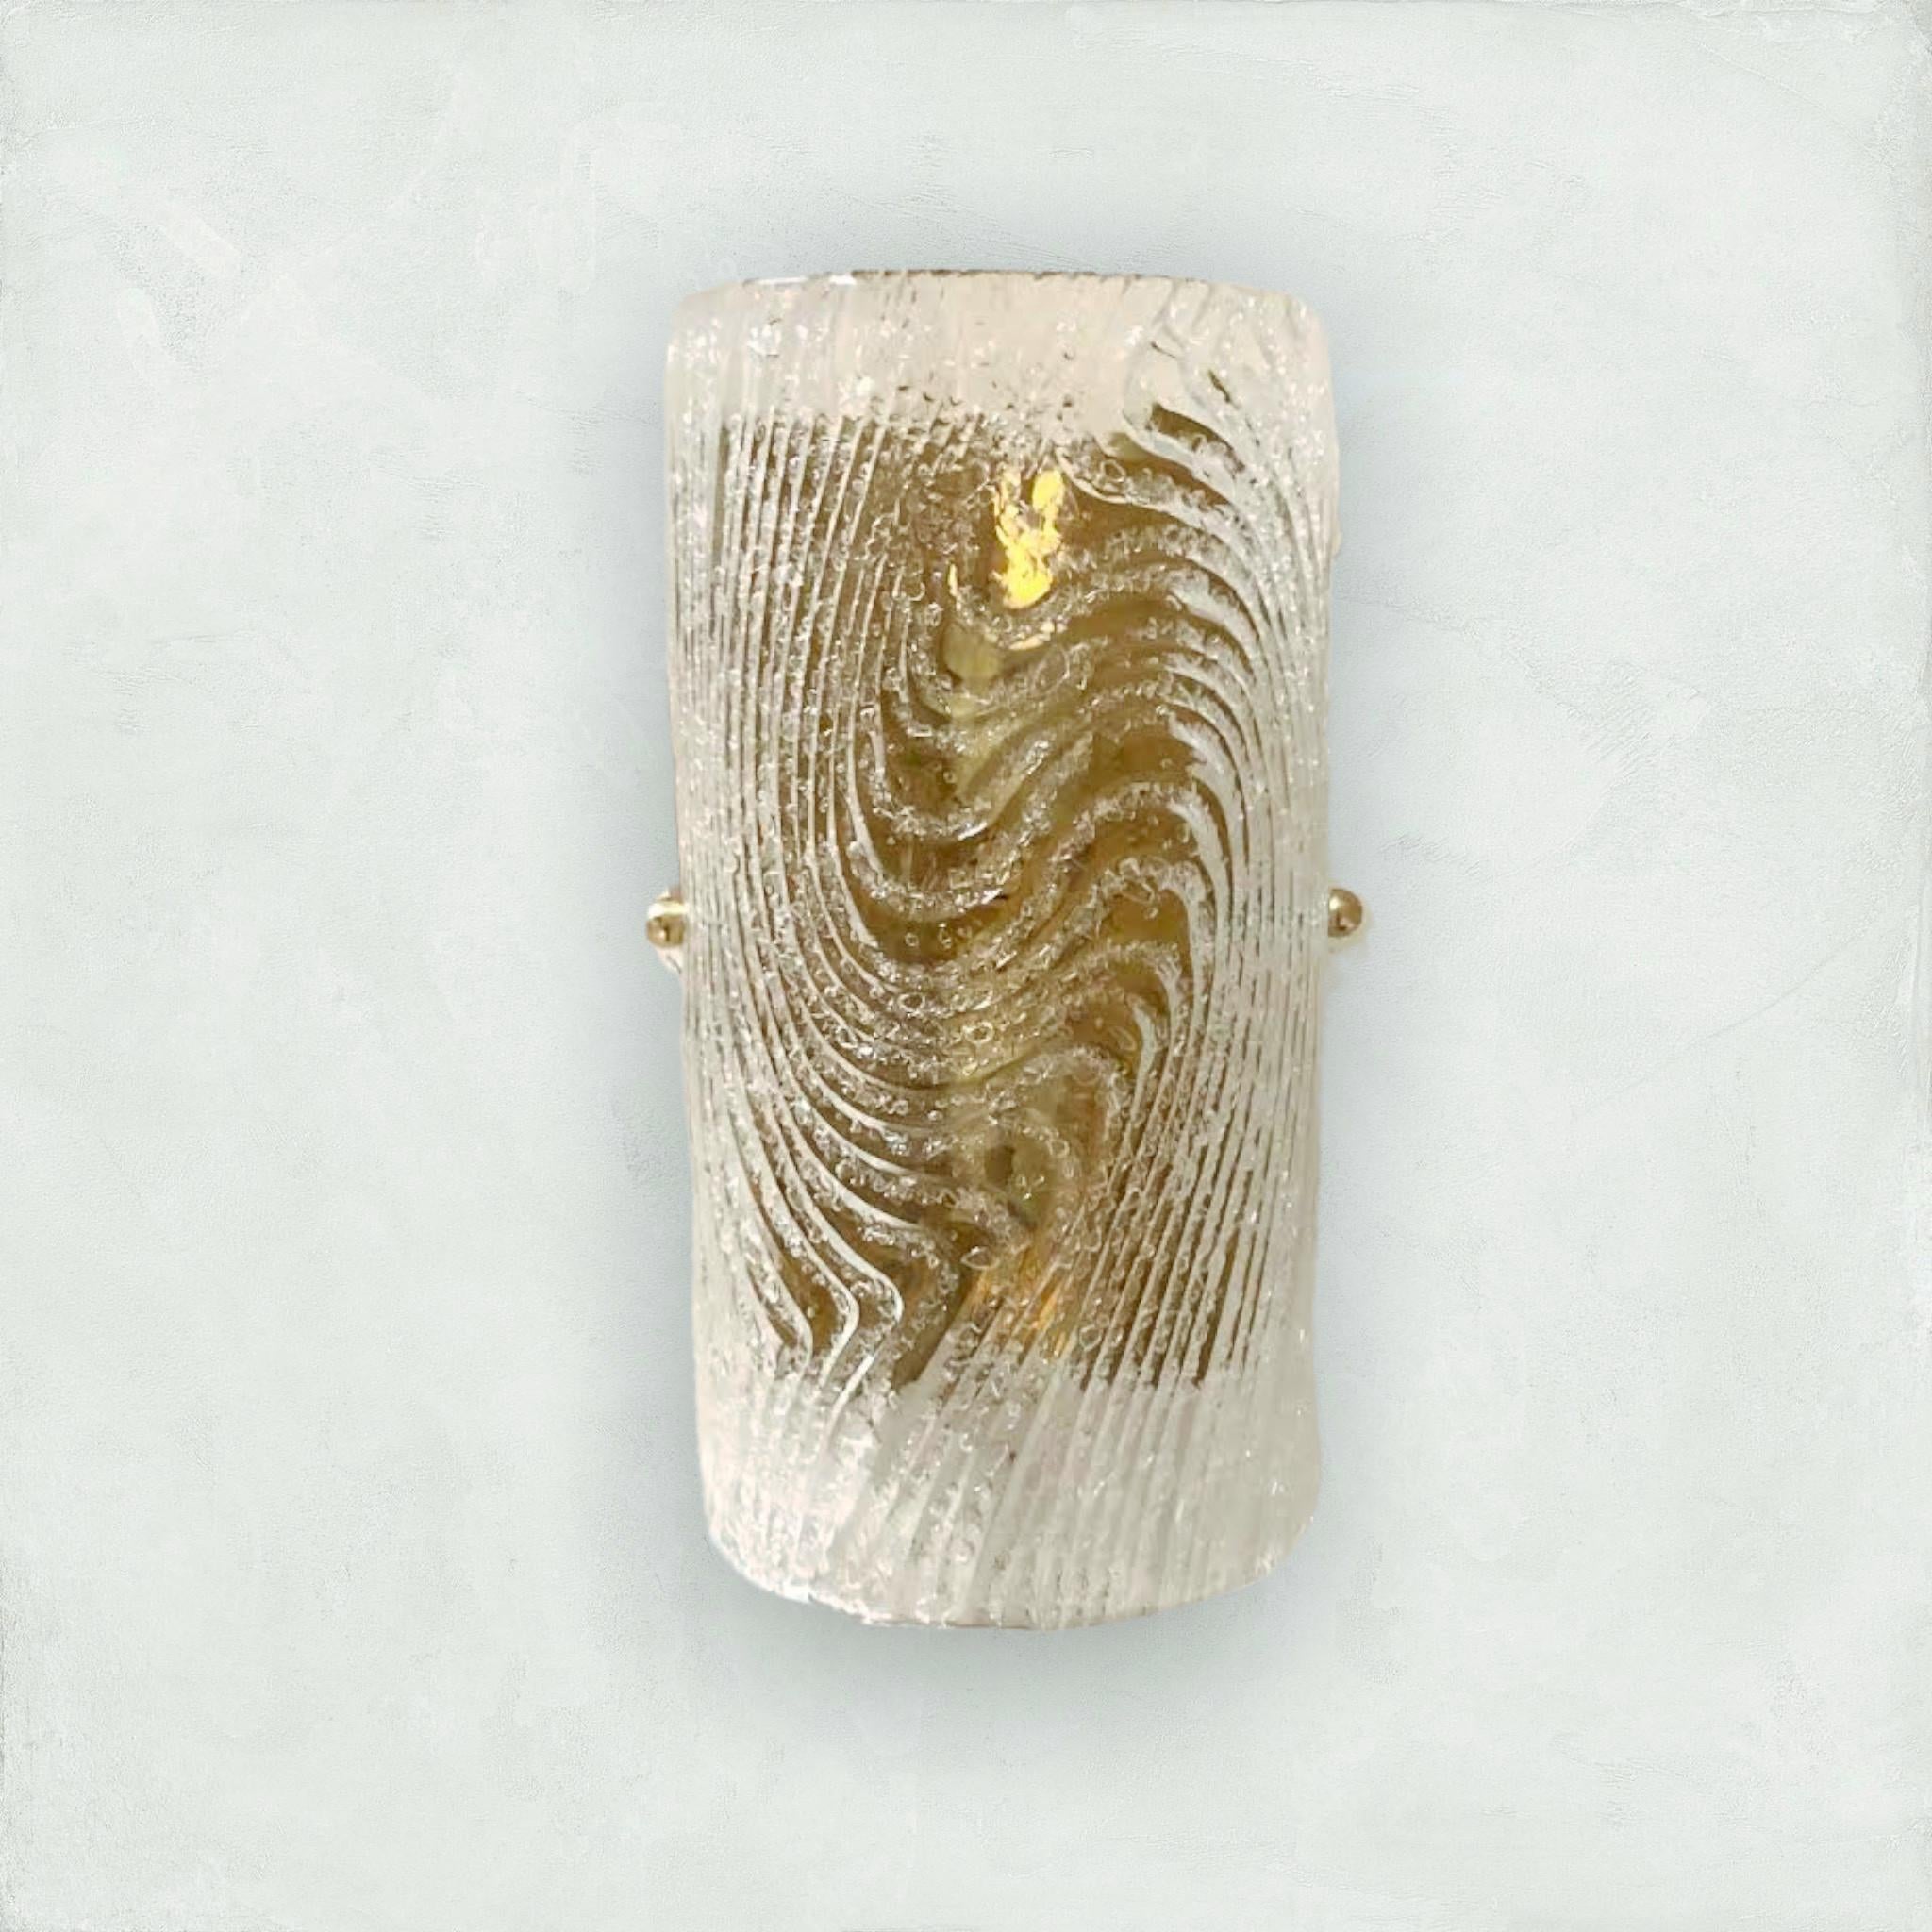 Italian wall light with clear Murano glass hand blown into cylinder shaped diffuser with textured patterns and granular effect using Graniglia technique, mounted on full brass back-plate / designed by Fabio Bergomi for Fabio Ltd / Made in Italy
2